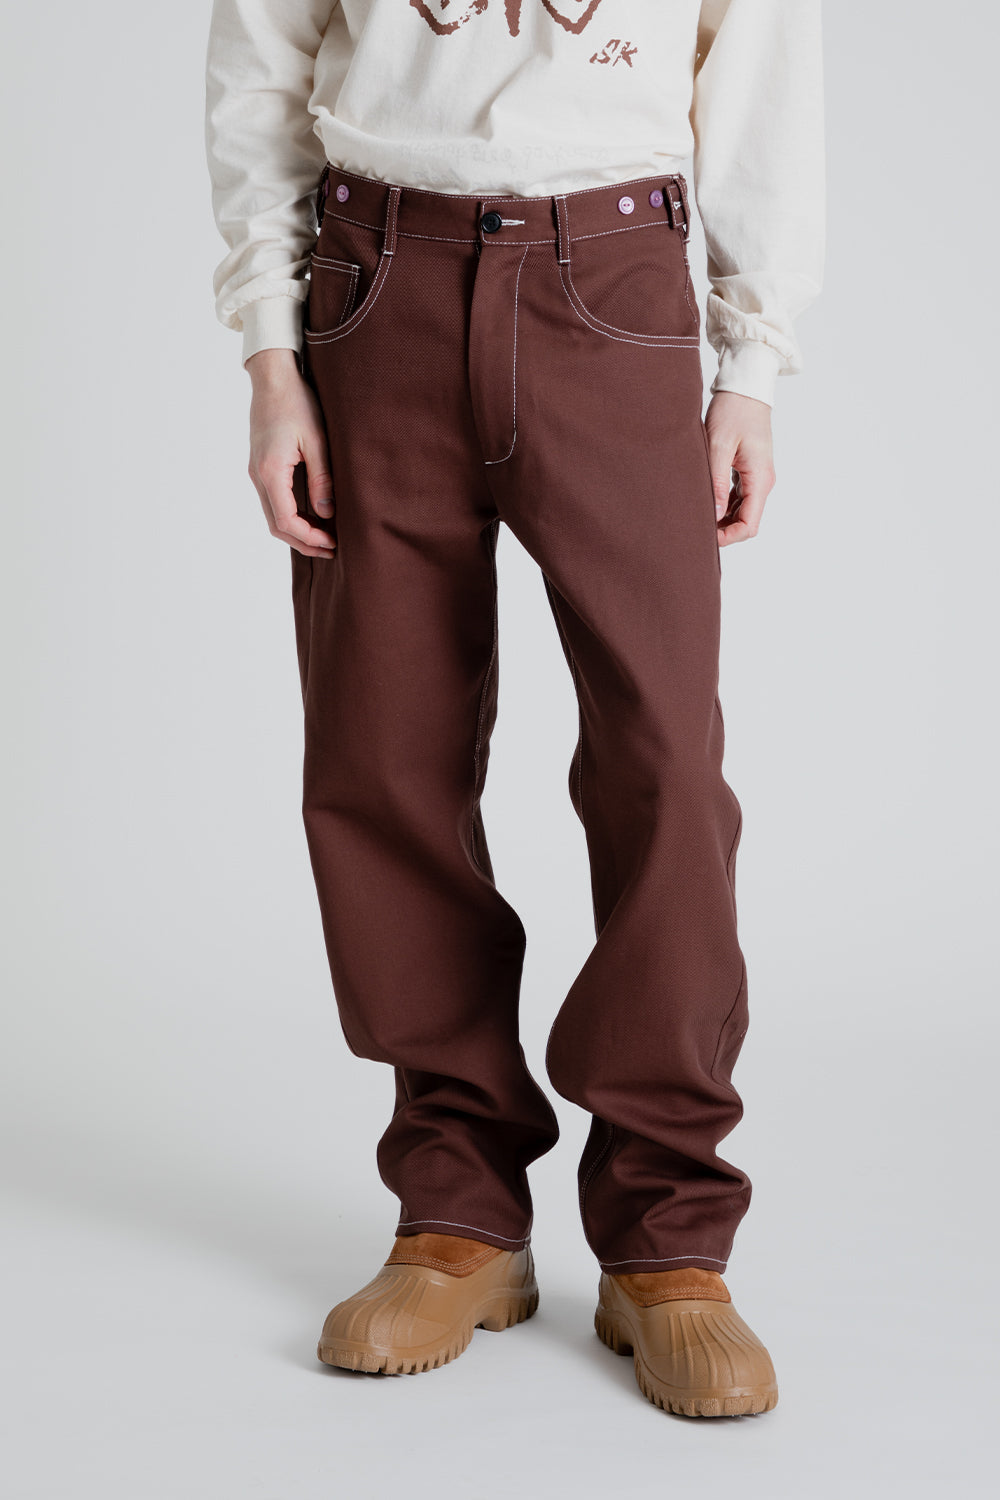 S.K. Manor Hill Ranch Pant in Brown Cotton Twill